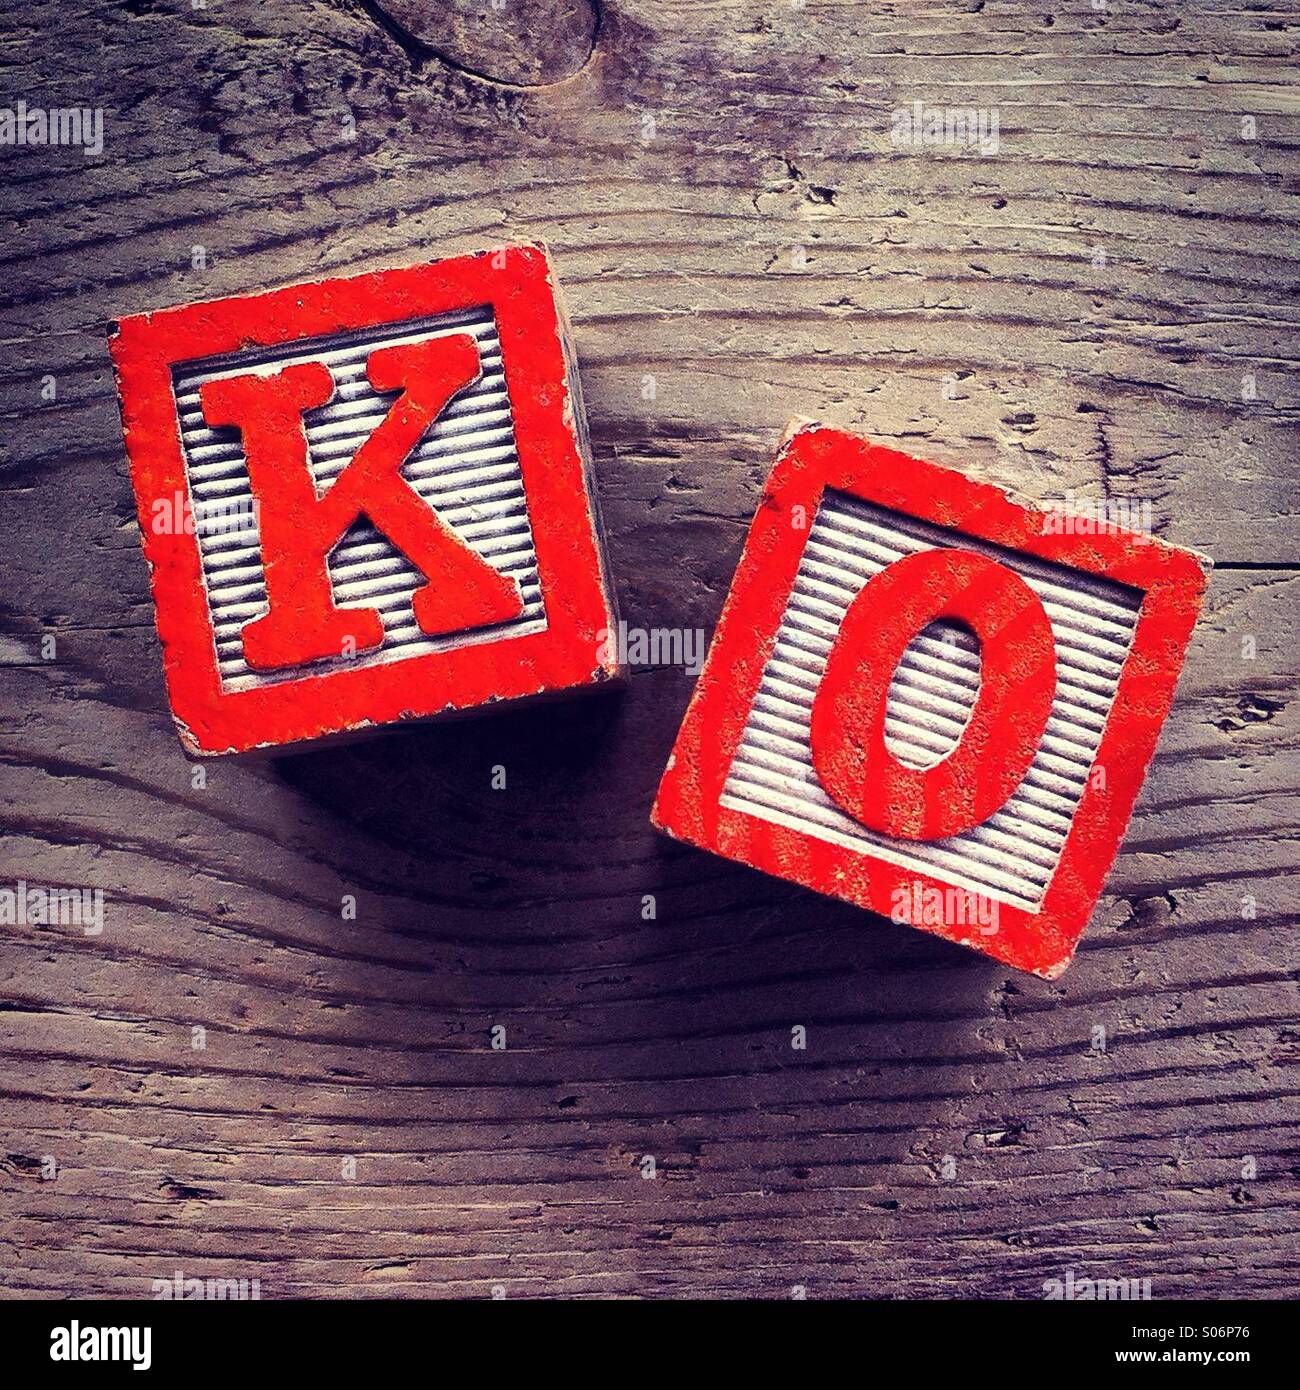 It's a photo of woodblocks toys will alphabet letter on them which are combines together to create the acronym KO Stock Photo